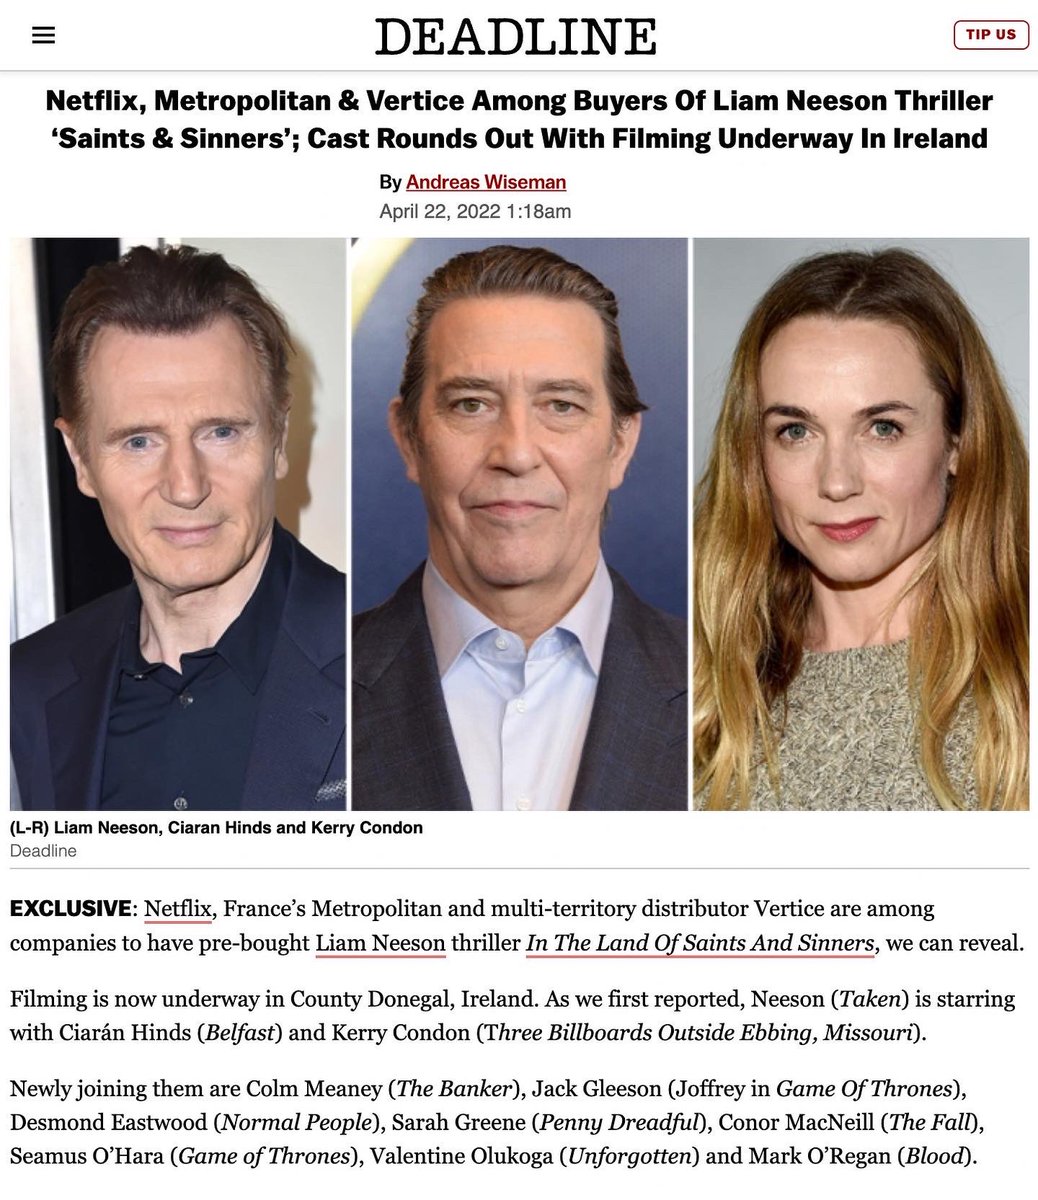 Film news 🎥 @Valvenus16 announced as supporting lead opposite Liam Neeson & Ciarán Hinds in upcoming thriller In The Land Of Saints And Sinners. Currently shooting in Ireland, with a @NetflixUK release TBA. Casting by @louisekiely @DEADLINE @theBBTAs #valentineolukoga